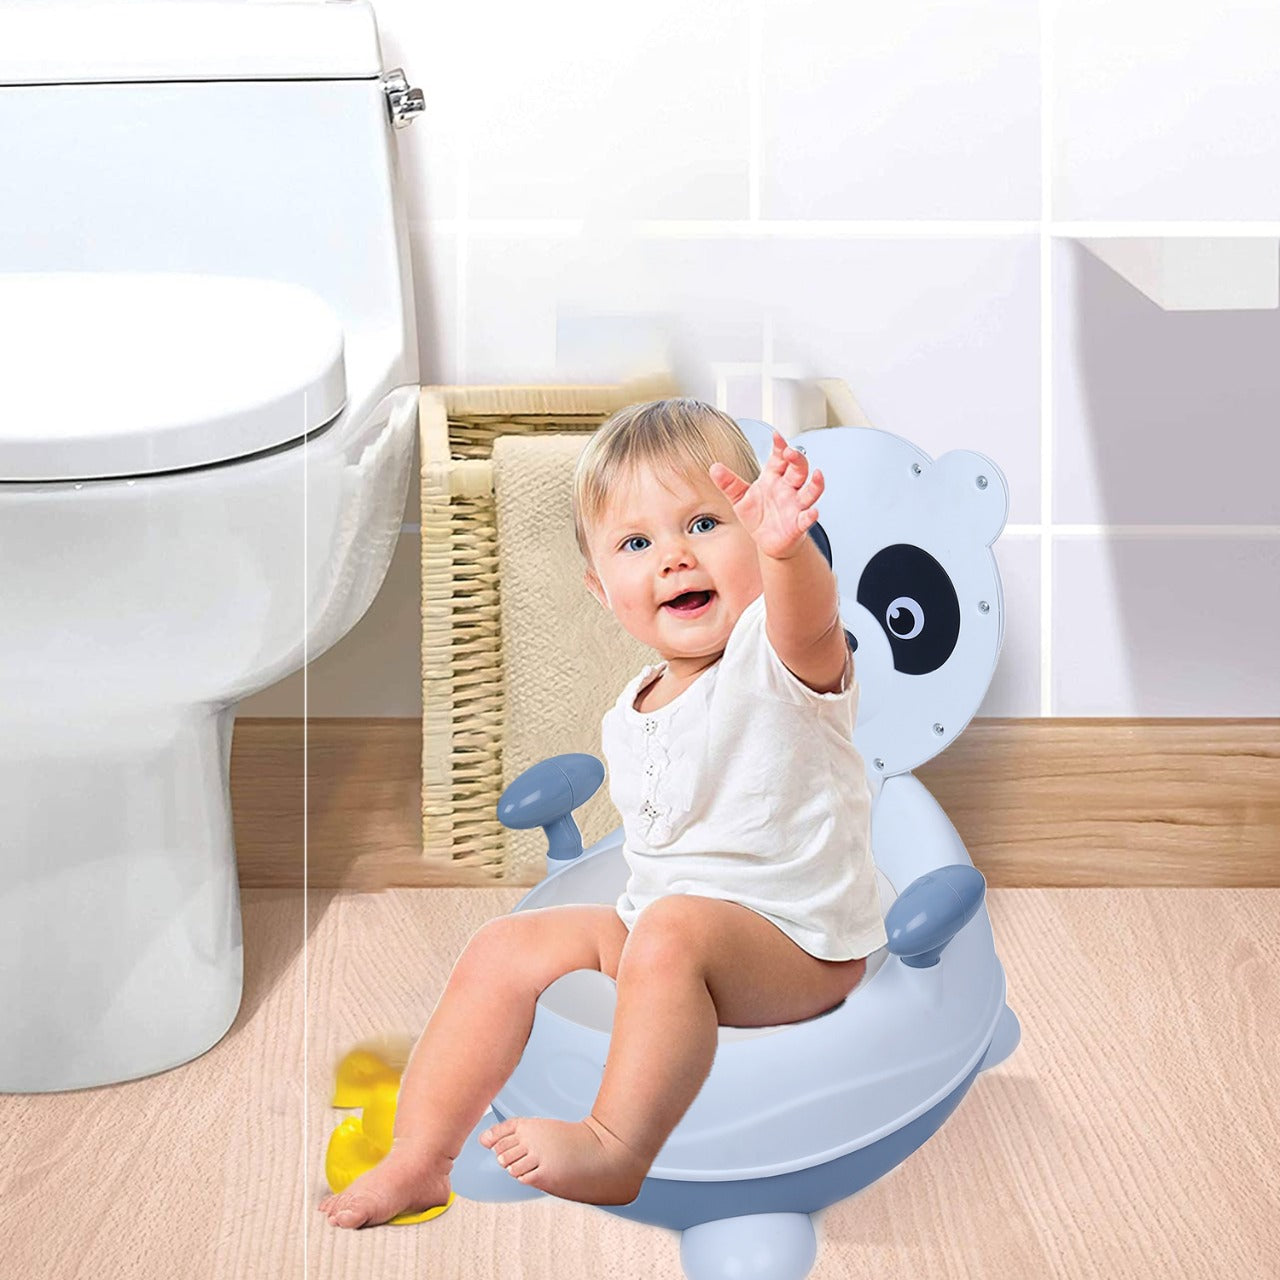 Baby Moo Panda Detachable Lid With Handle For Toilet Training Potty Chair - White - Baby Moo